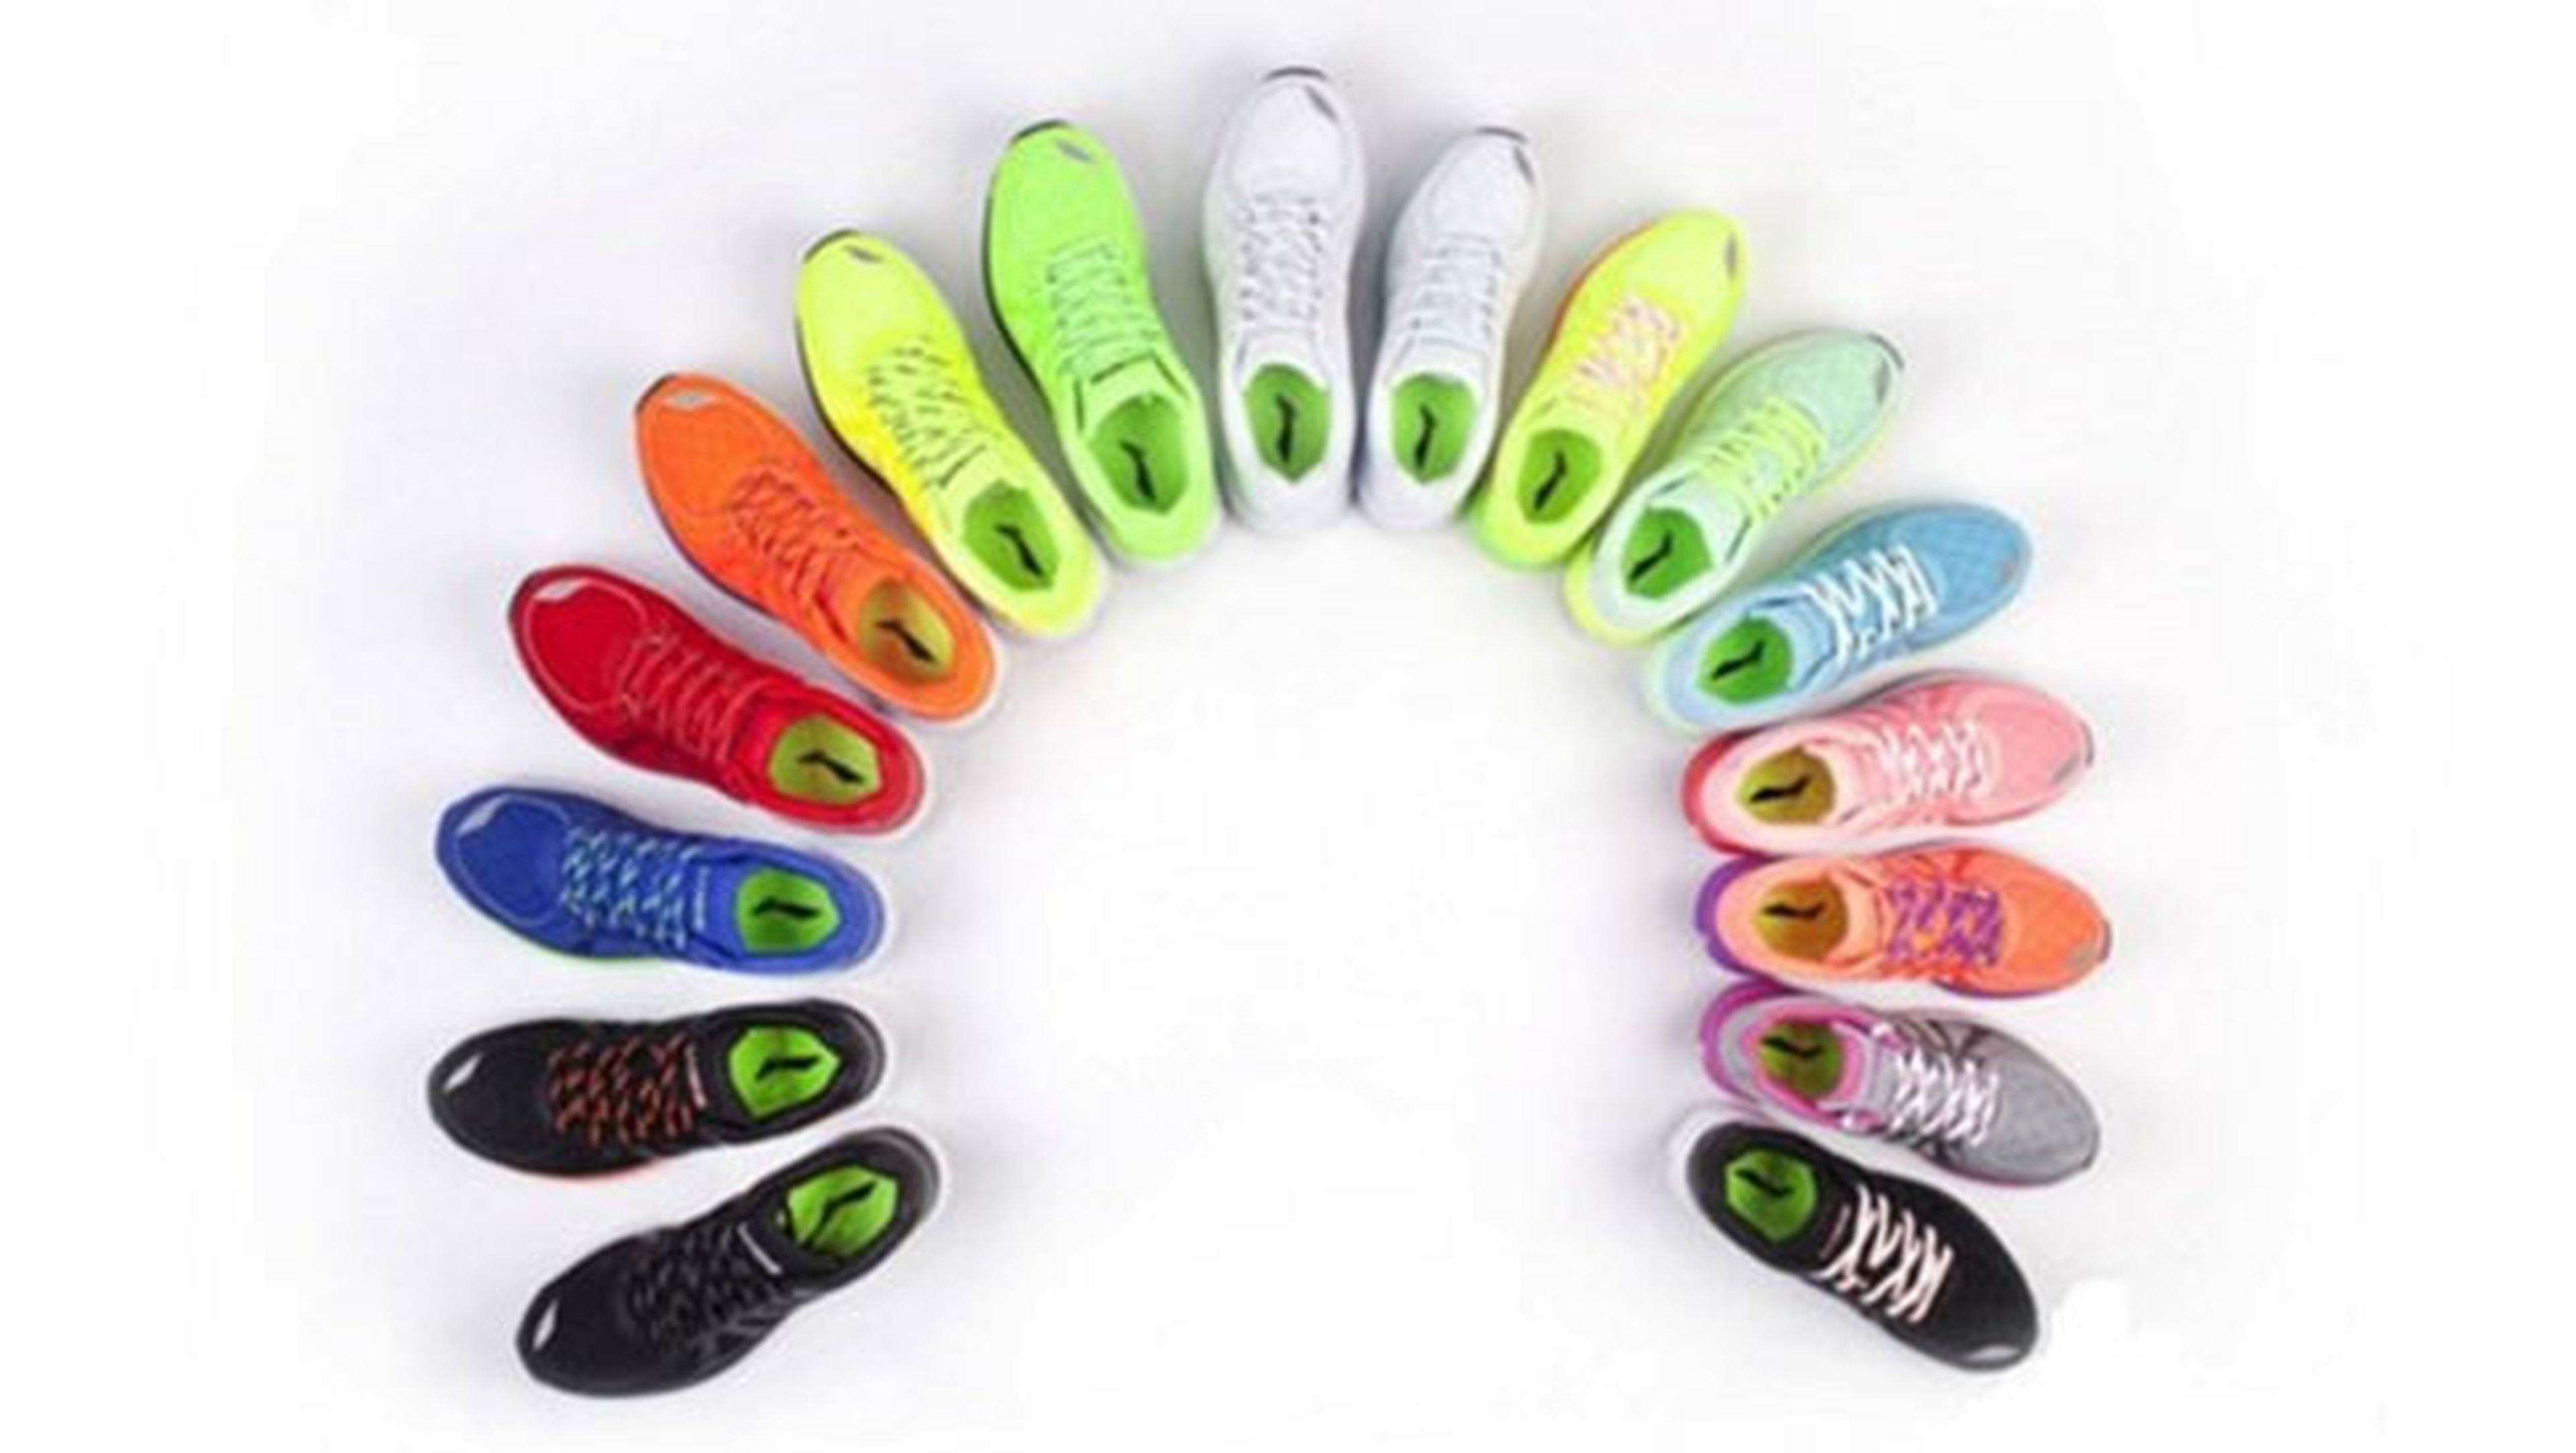 Xiaomi Li-Ning Smart Shoes cool technology price you don't expect